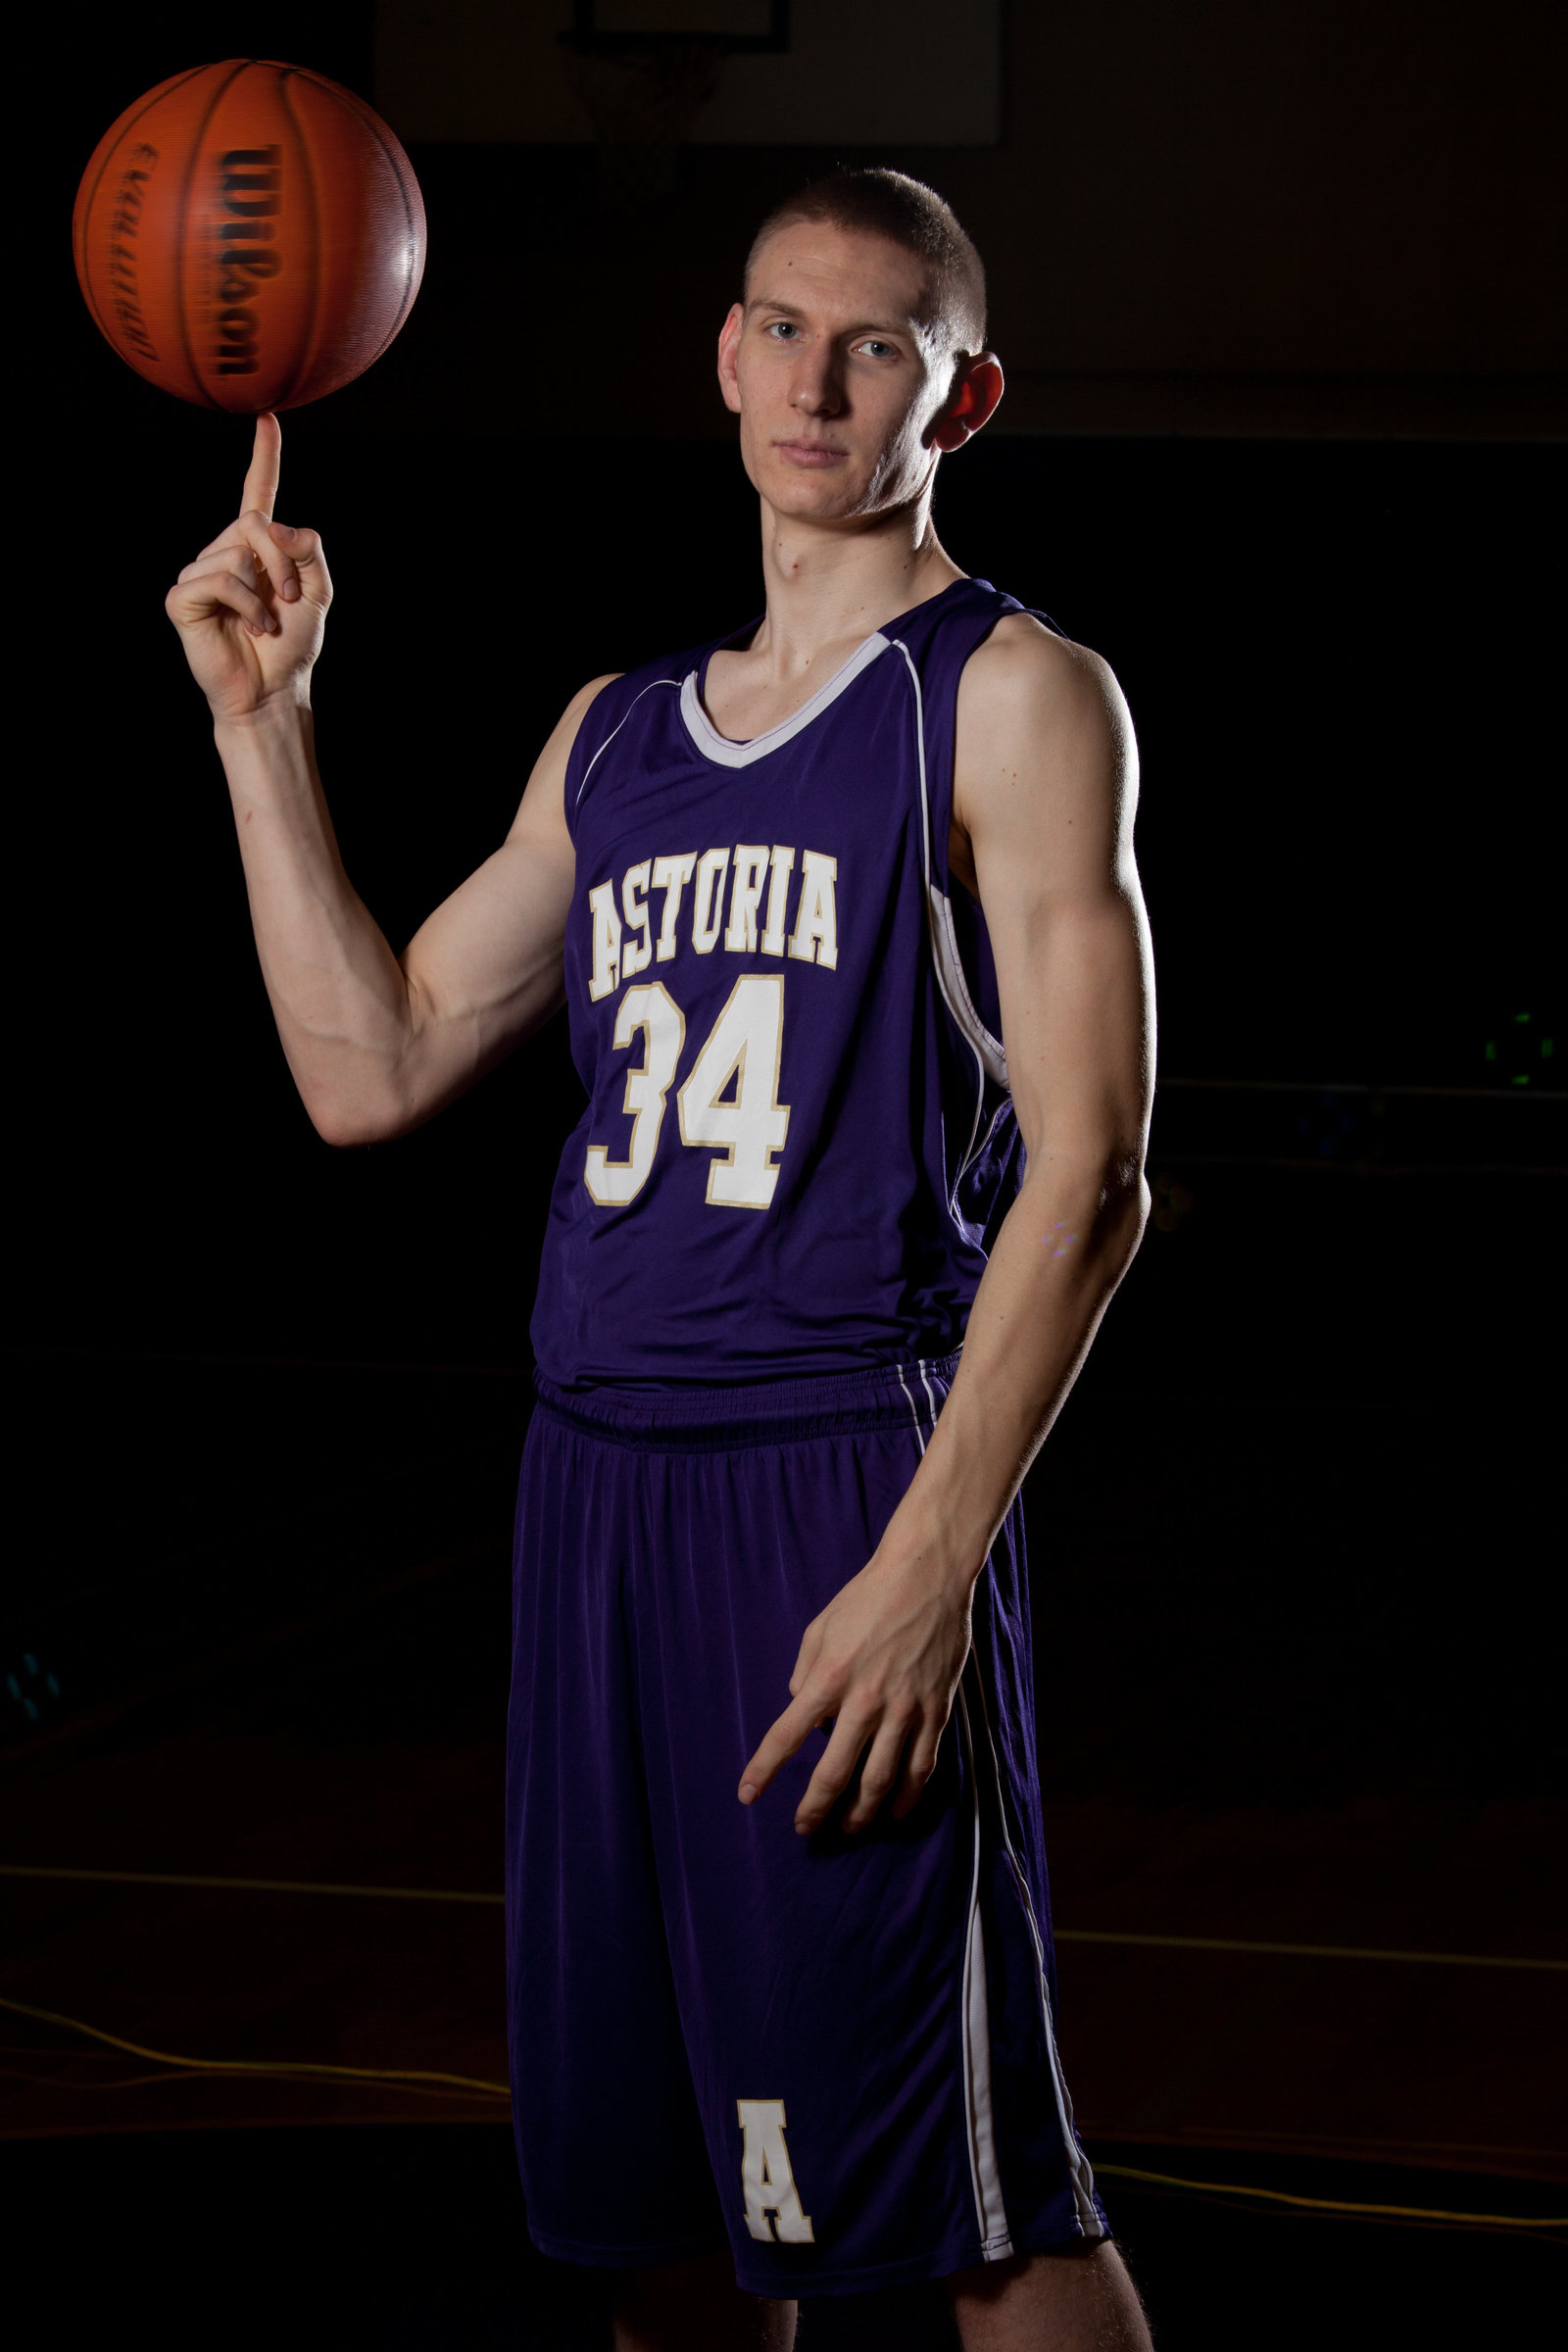 A graduate of Astoria high school Spins a basketball on one finger in the Astoria Oregon high school gym. He has the purple Astoria uniform on.